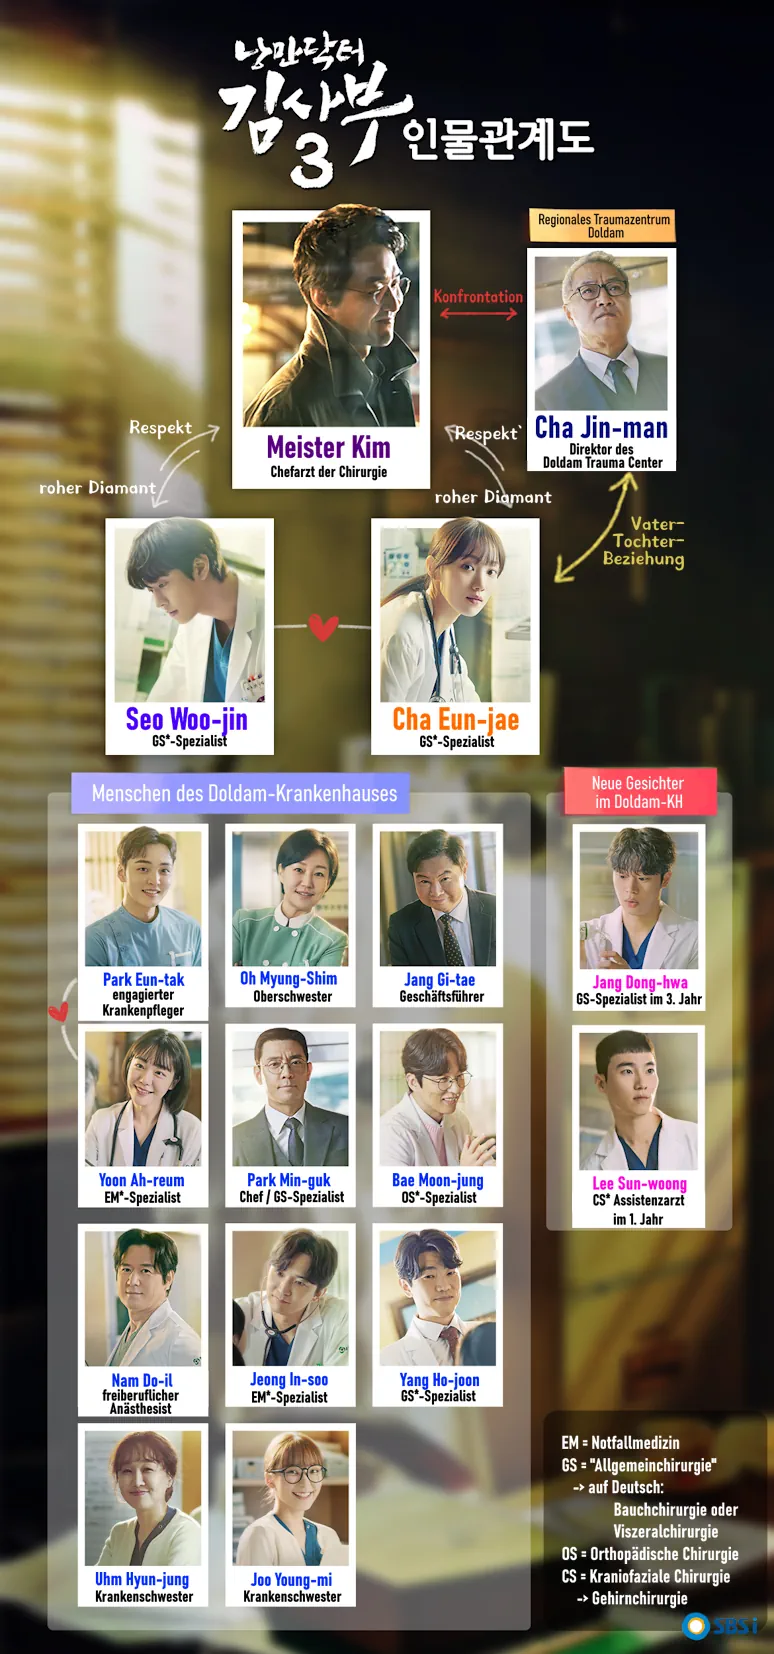 Dr. romantic 3 who is who